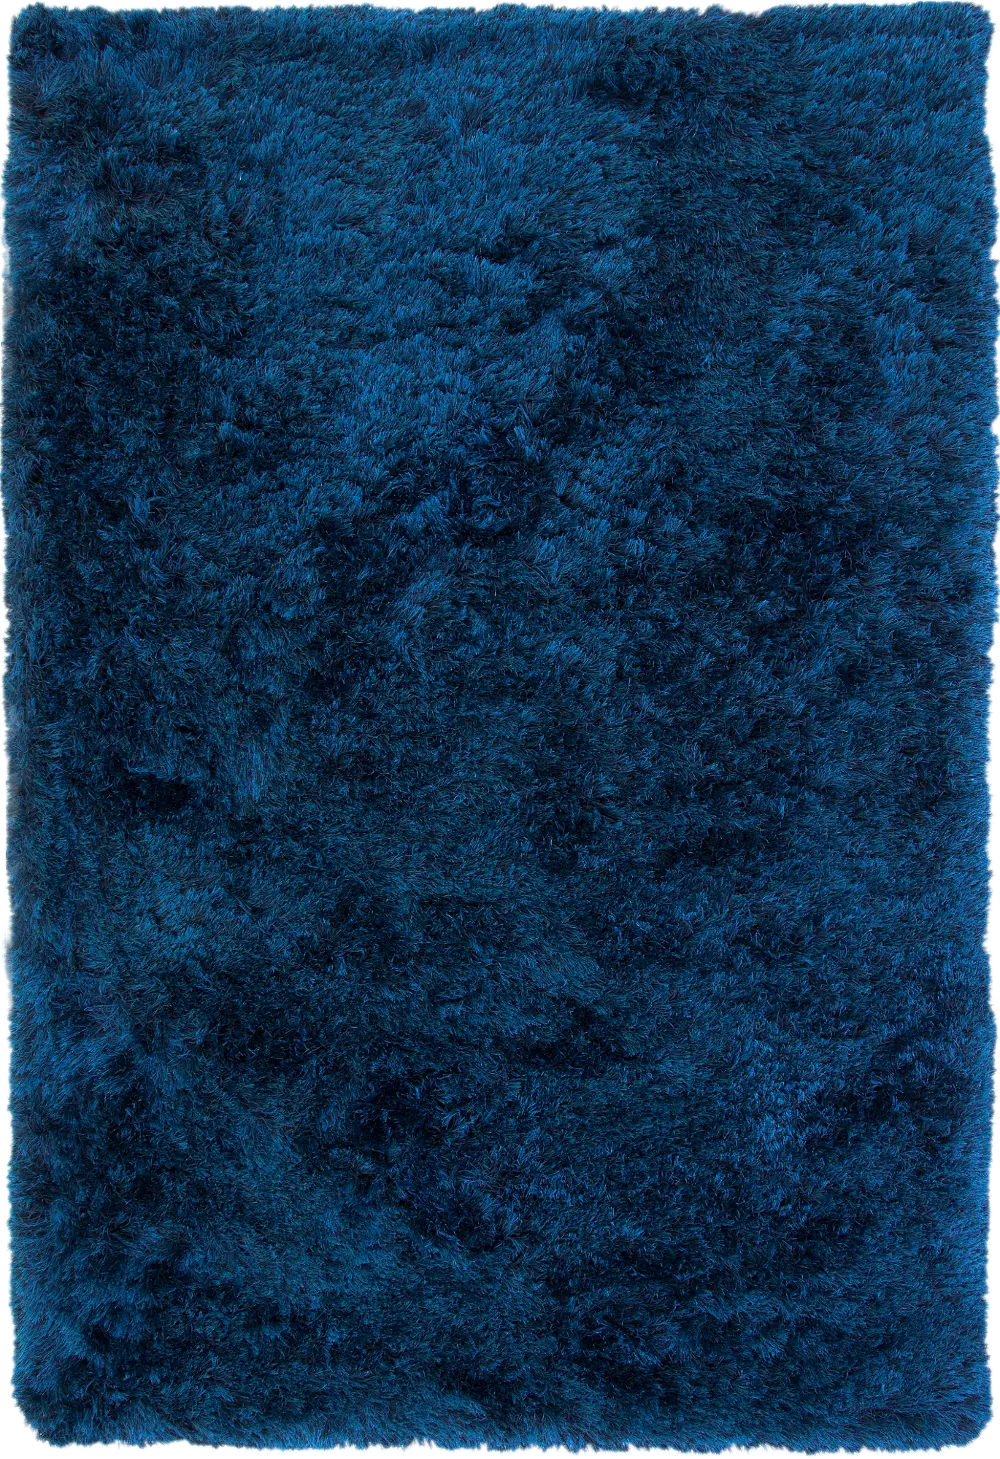 8 x 10 Large Contemporary Navy Blue Shag Rug - Luxe Shag-1